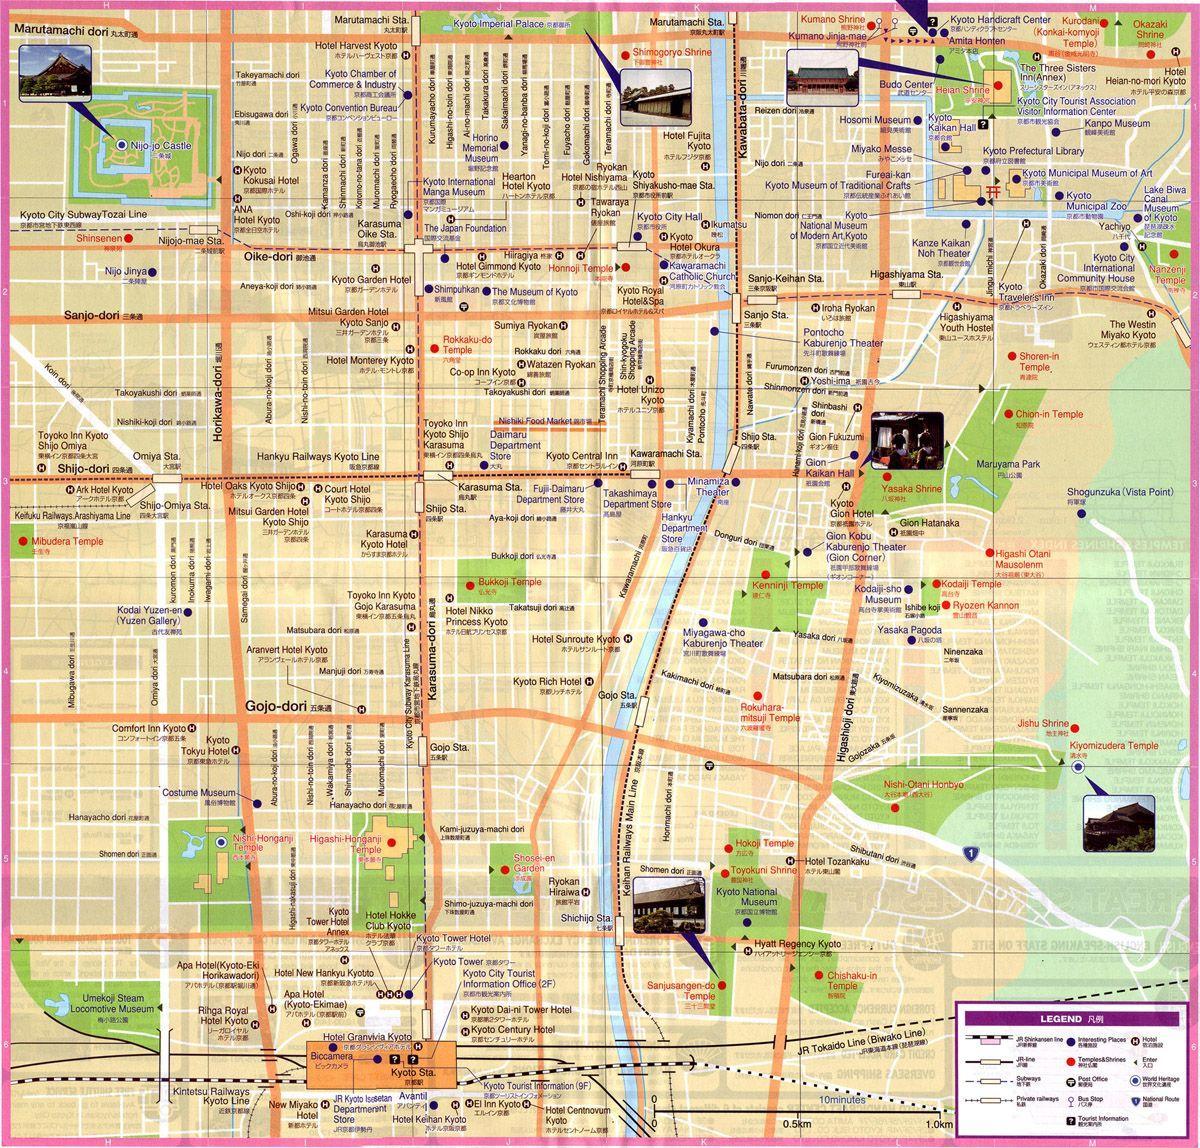 Kyoto streets map